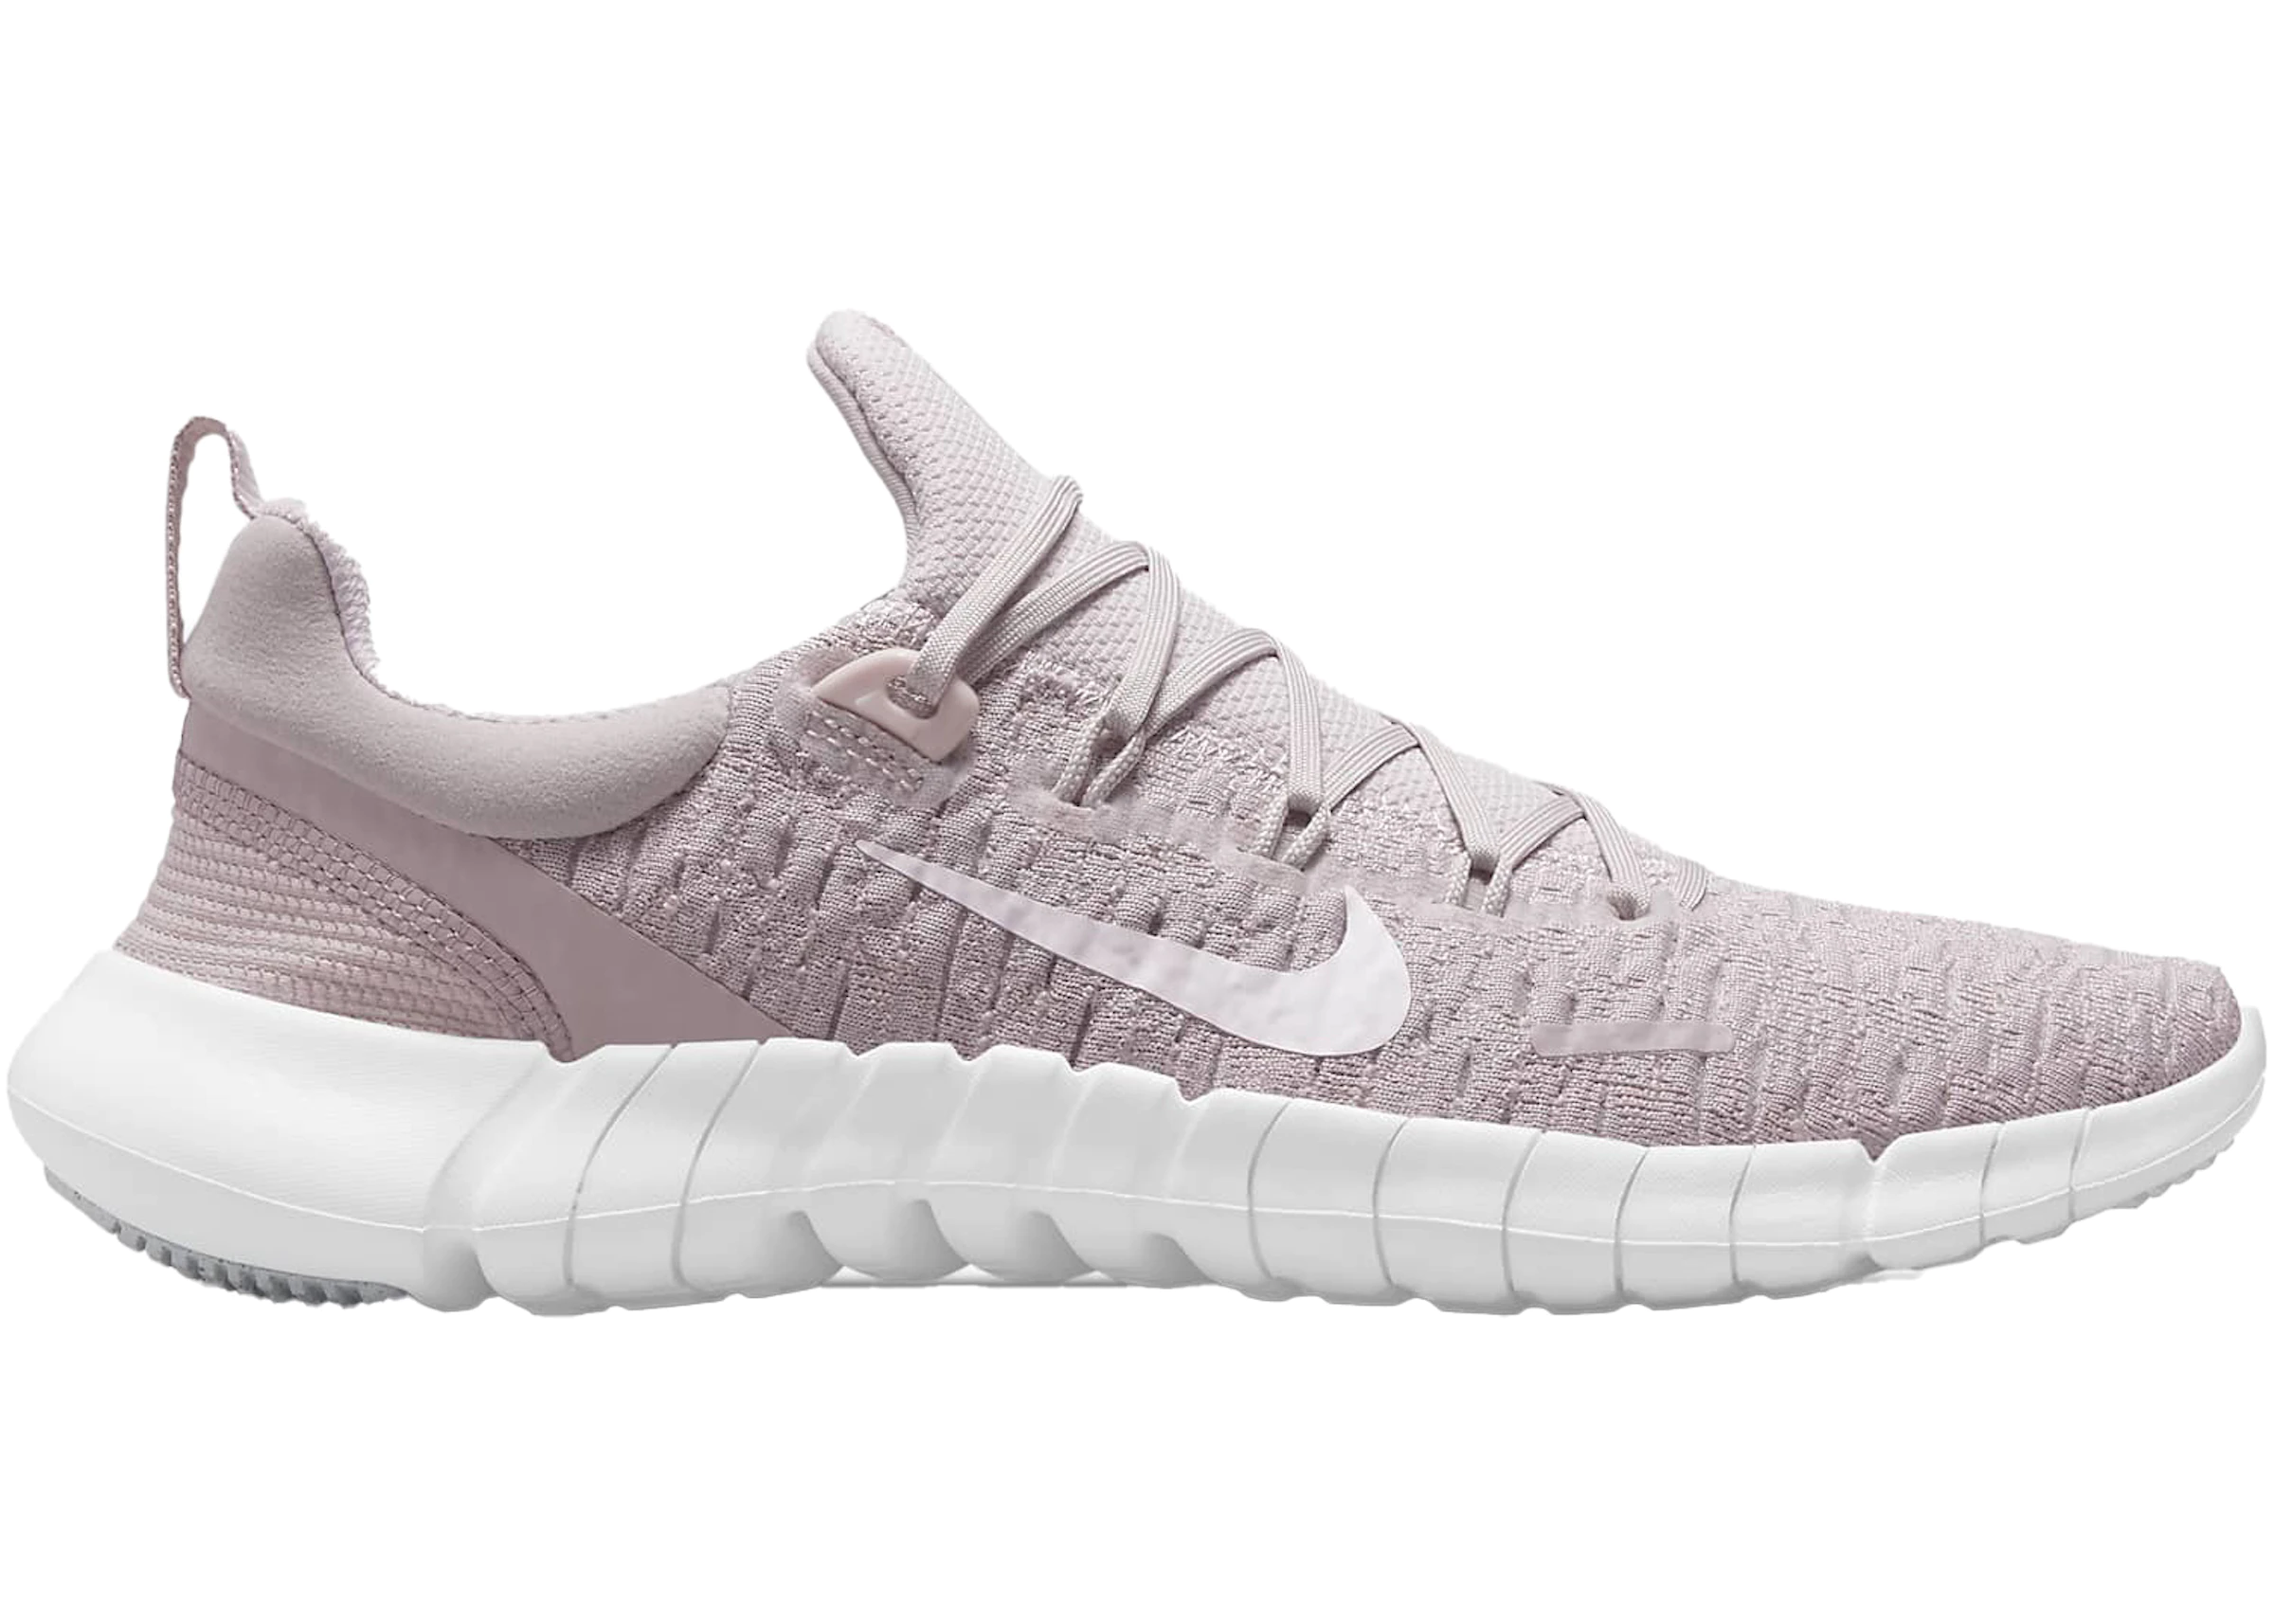 Inappropriate Tighten Governable Nike Free Run 5.0 Platinum Violet (W) - CZ1891-004 - US